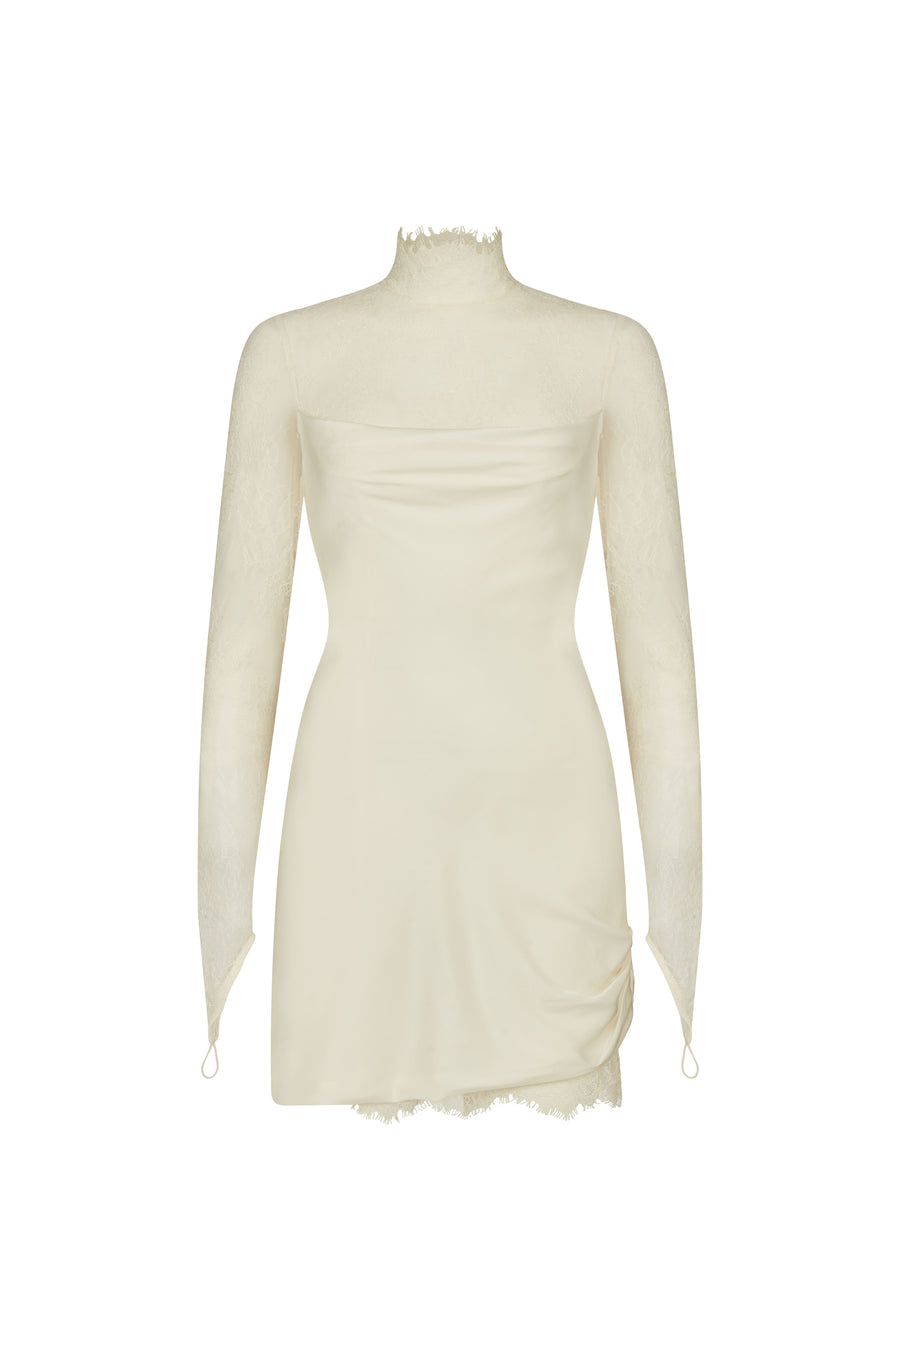 CROISSANT MINI DRESS IN IVORY SILK SATIN AND LACE